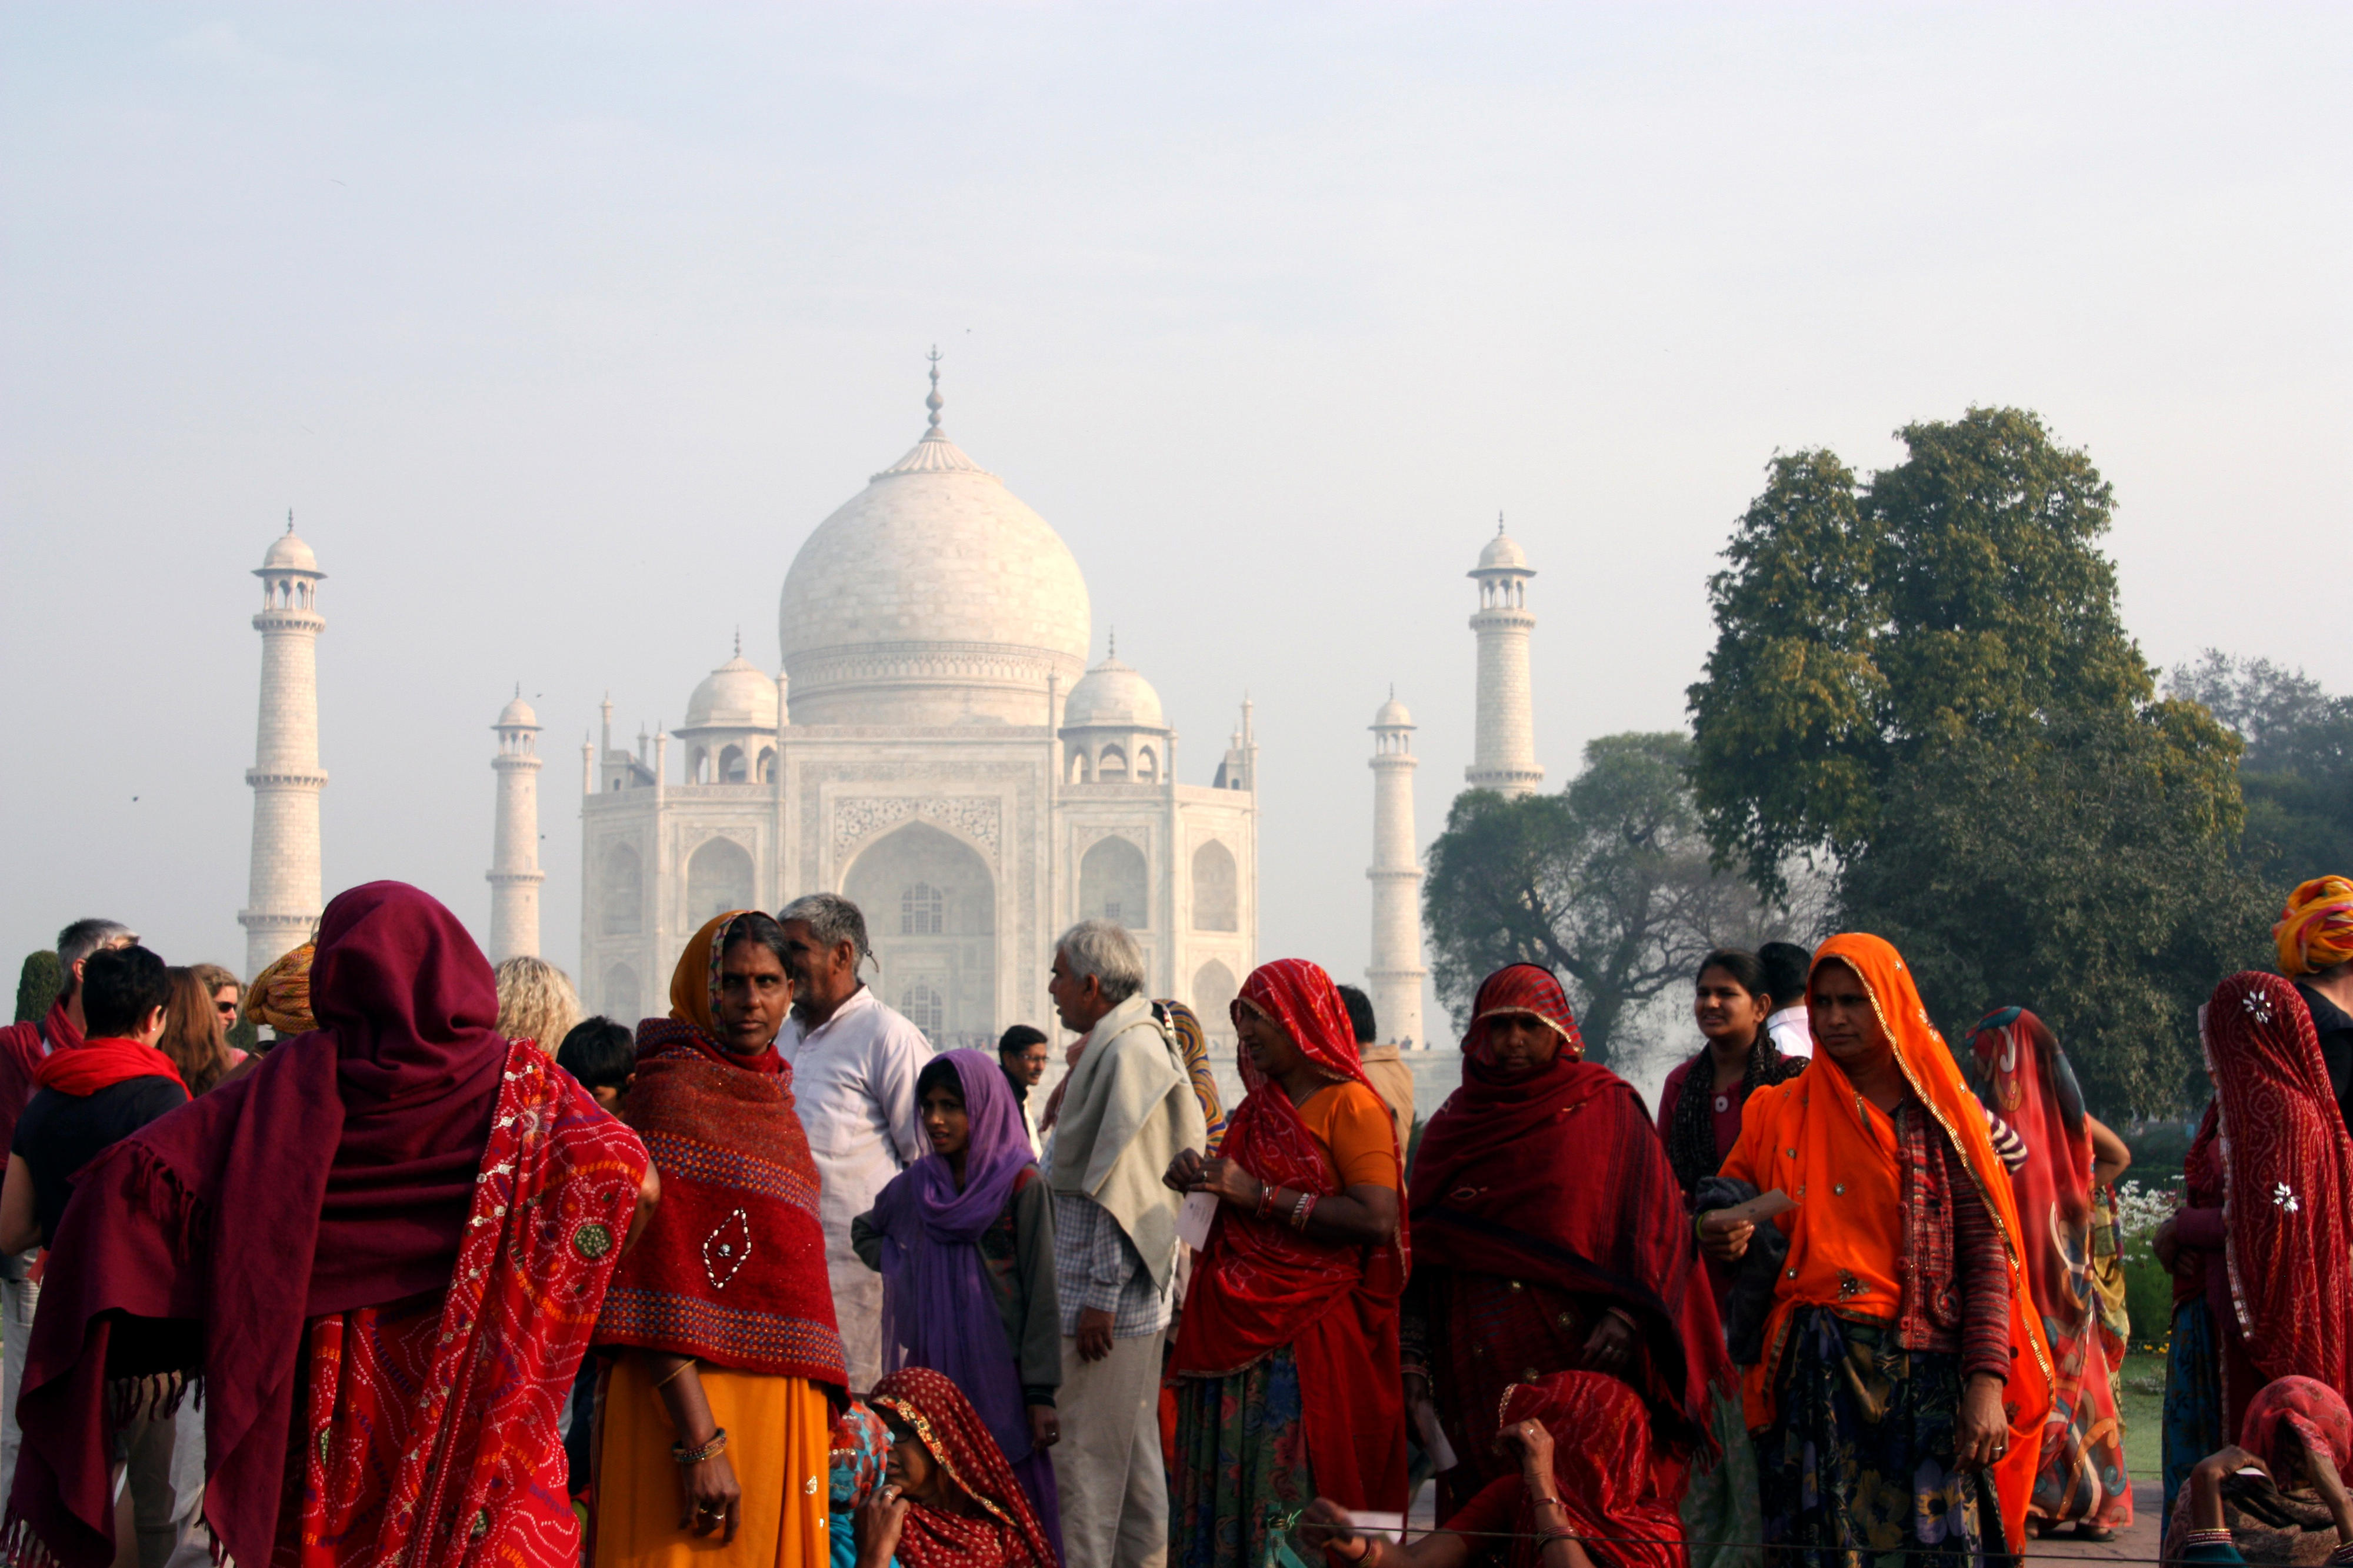 People in front of the Taj Mahal, a mausoleum in the state of Uttar Pradesh, India